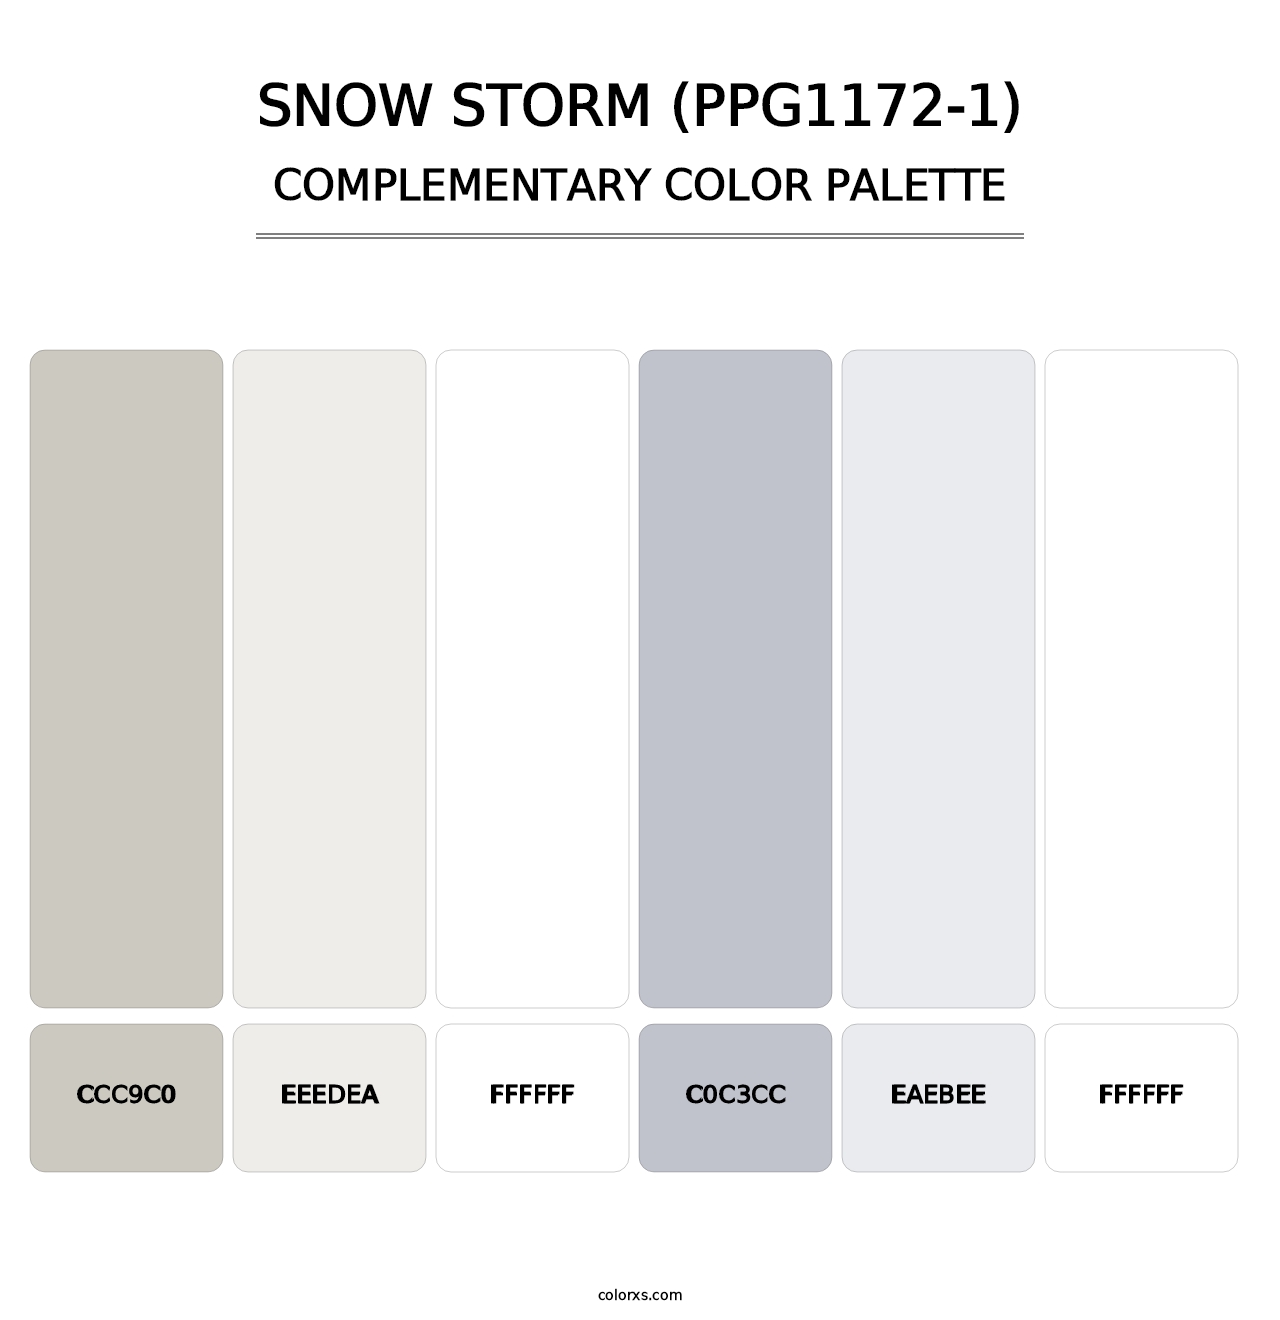 Snow Storm (PPG1172-1) - Complementary Color Palette